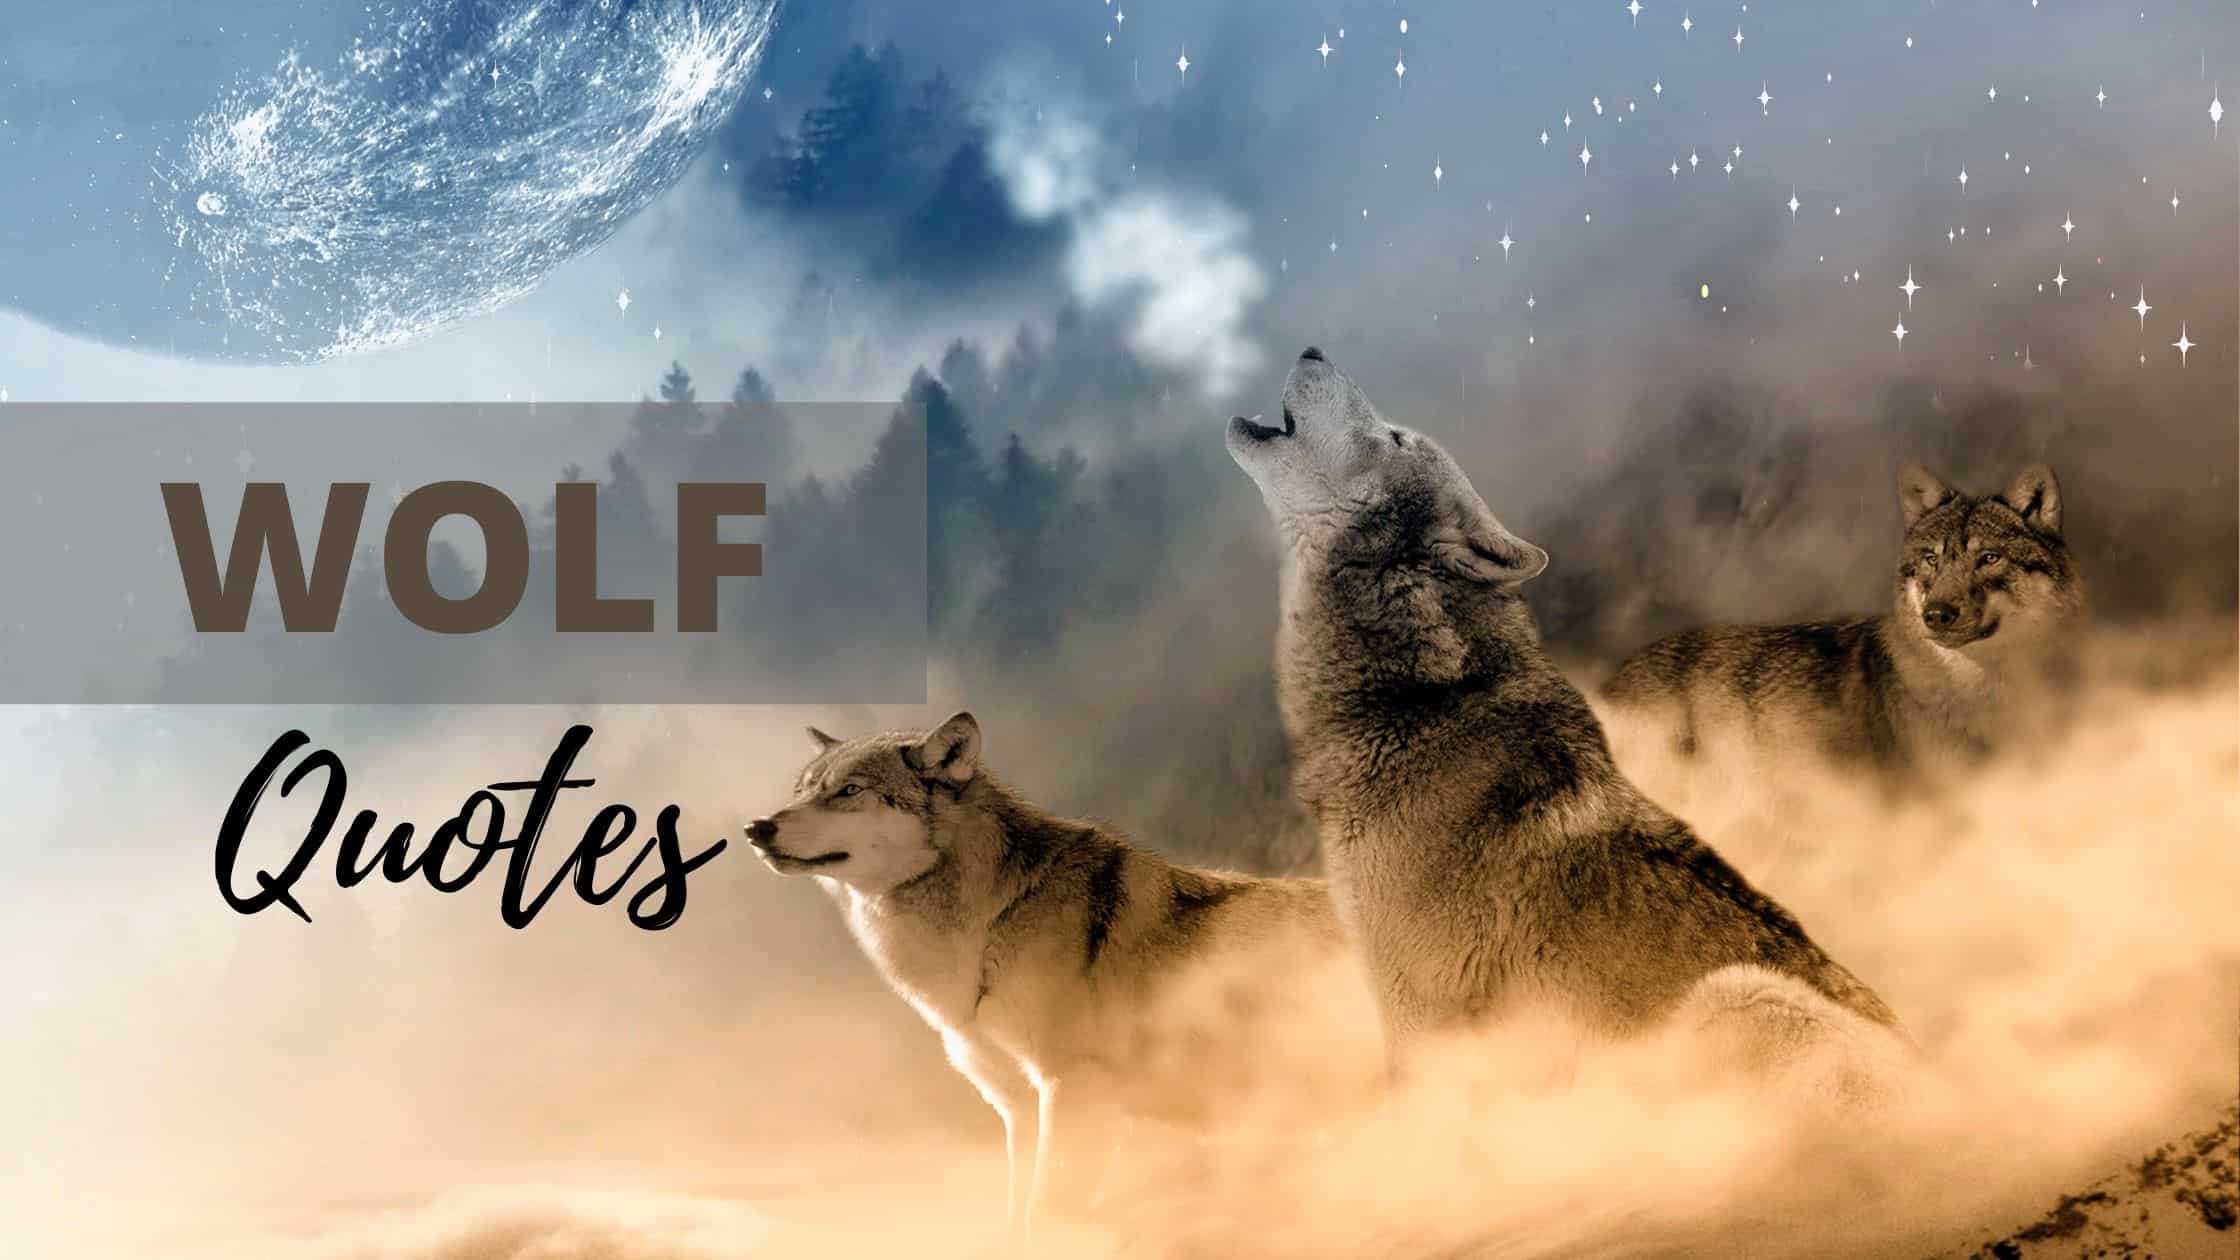 100+ (BEST) Wolf Quotes To Make You Smarter And Braver